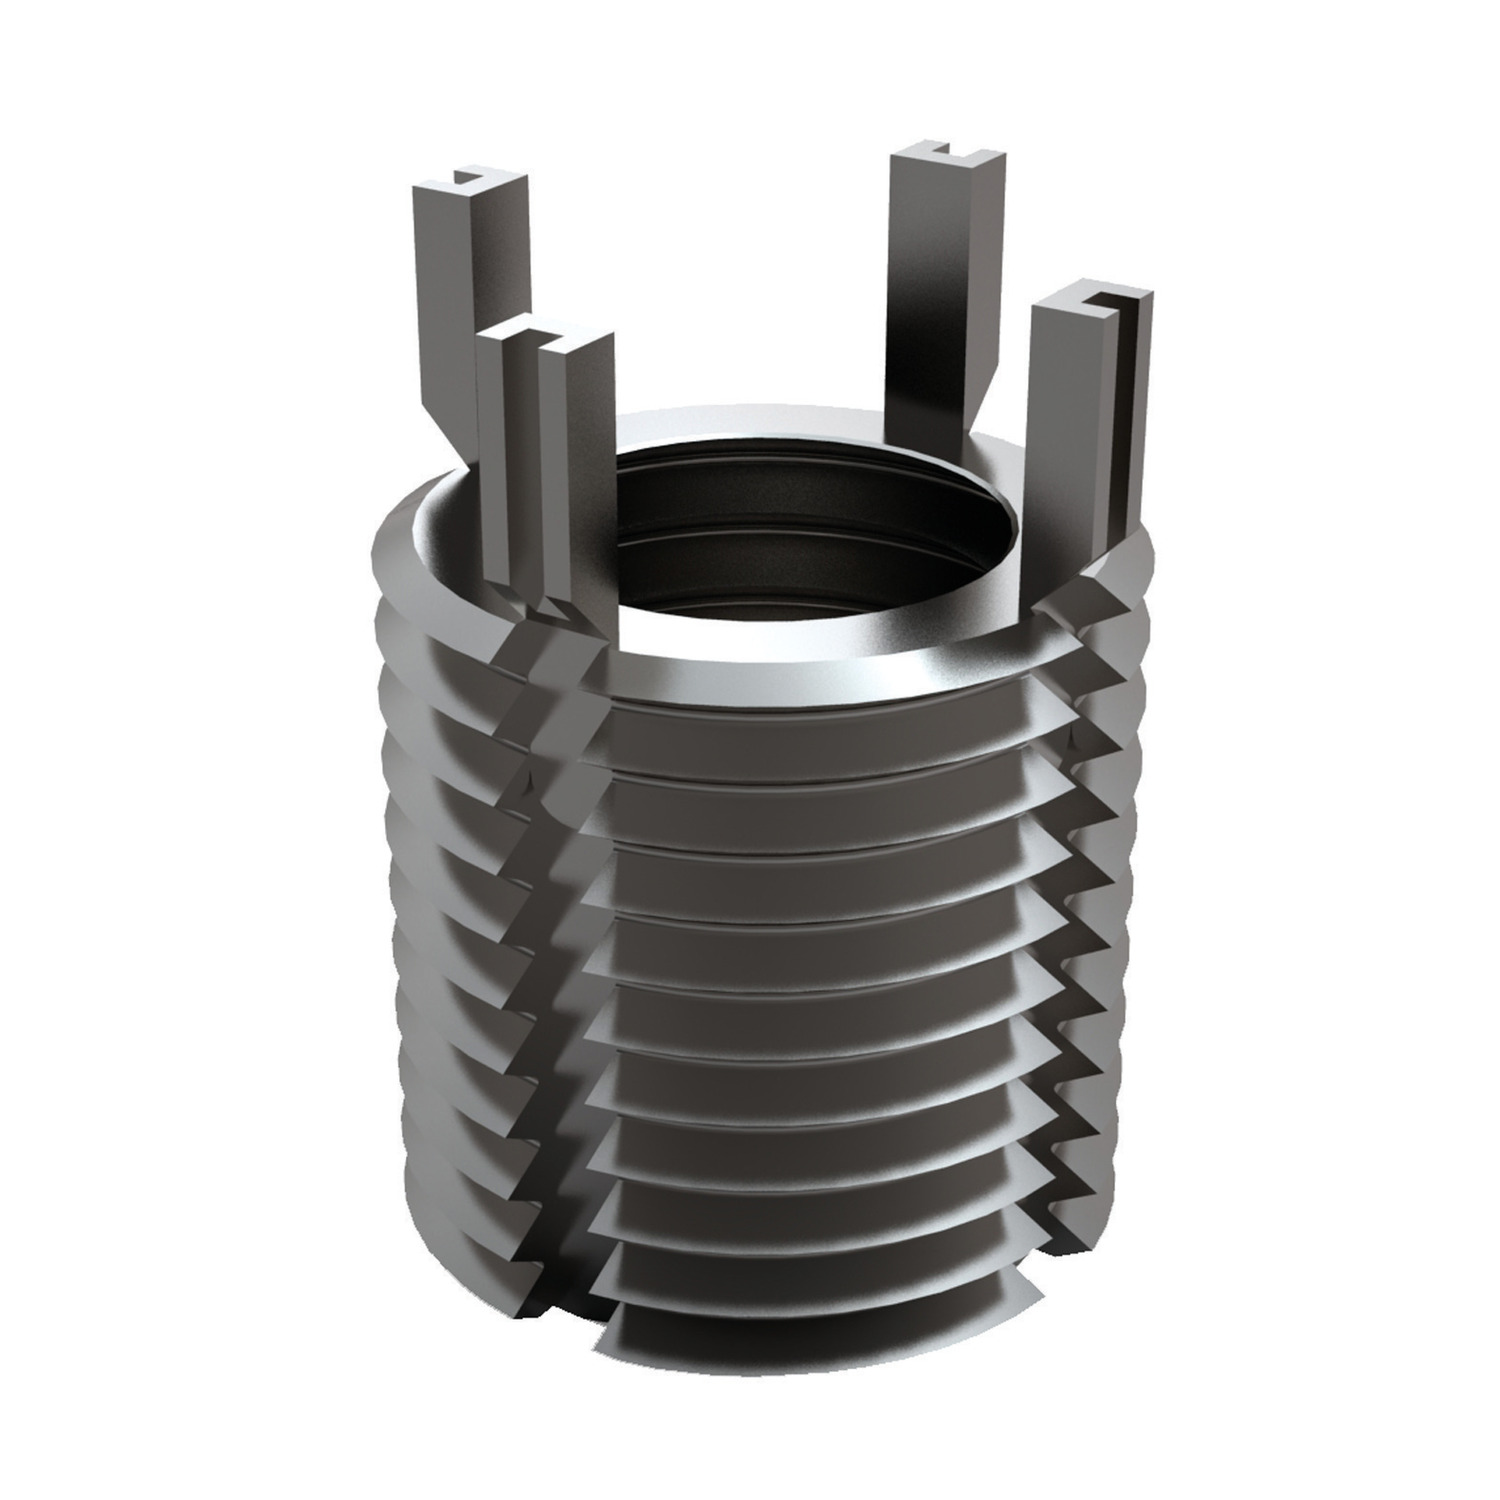 Product 22000, Threaded Insert - Metric thinwall - stainless steel / 